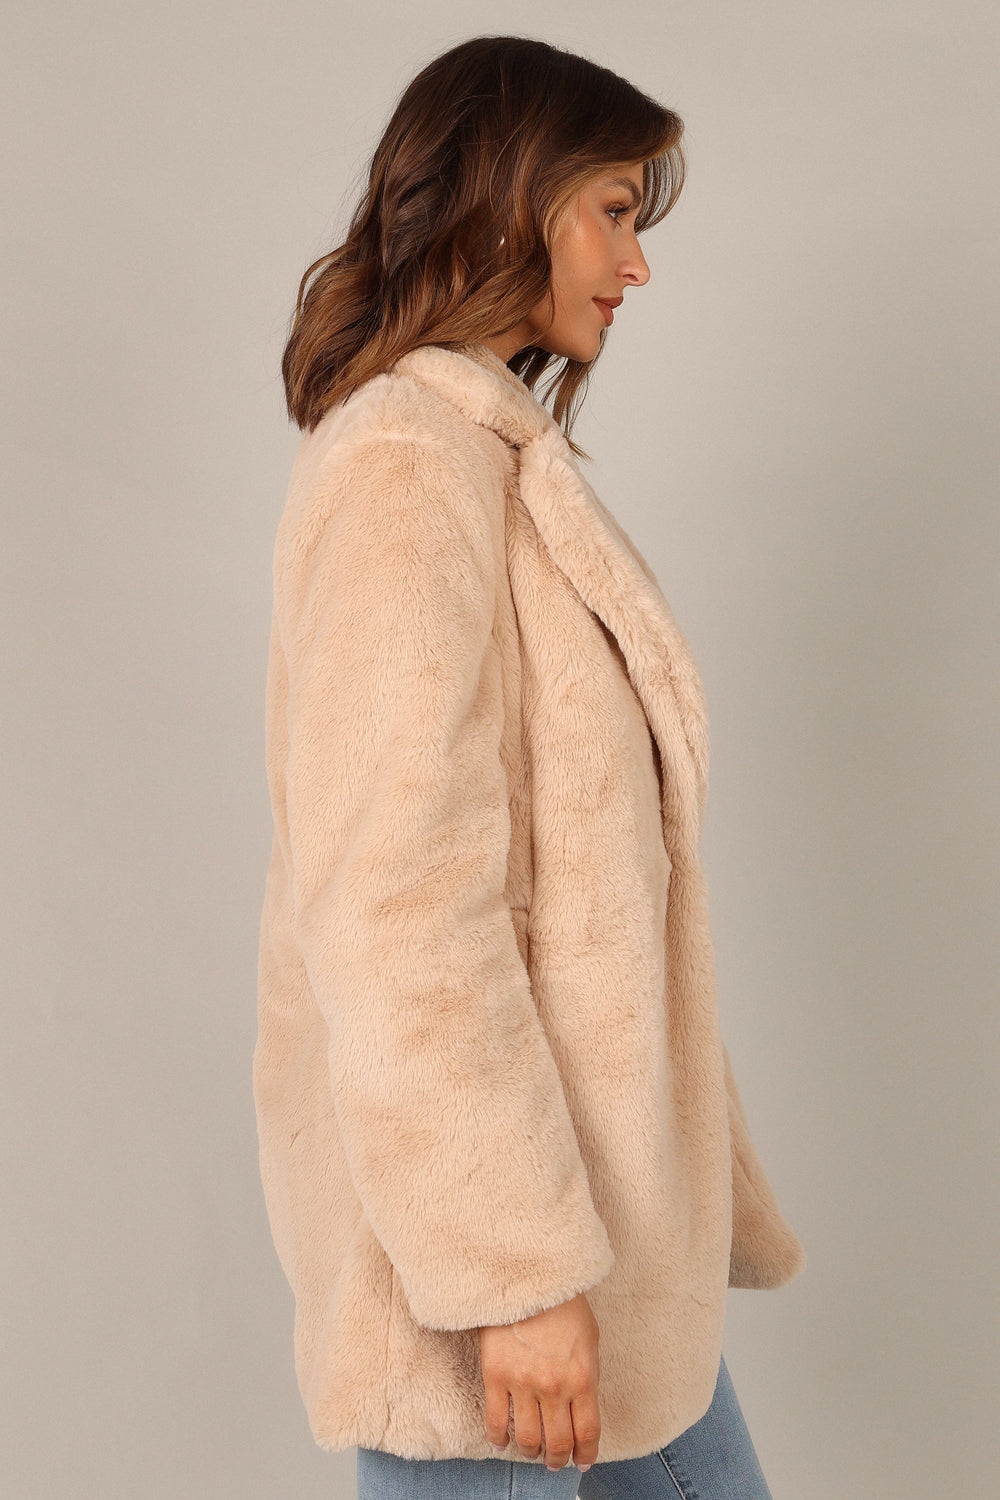 Petal and Pup USA Outerwear Raye Open Front Faux Fur Coat - Beige